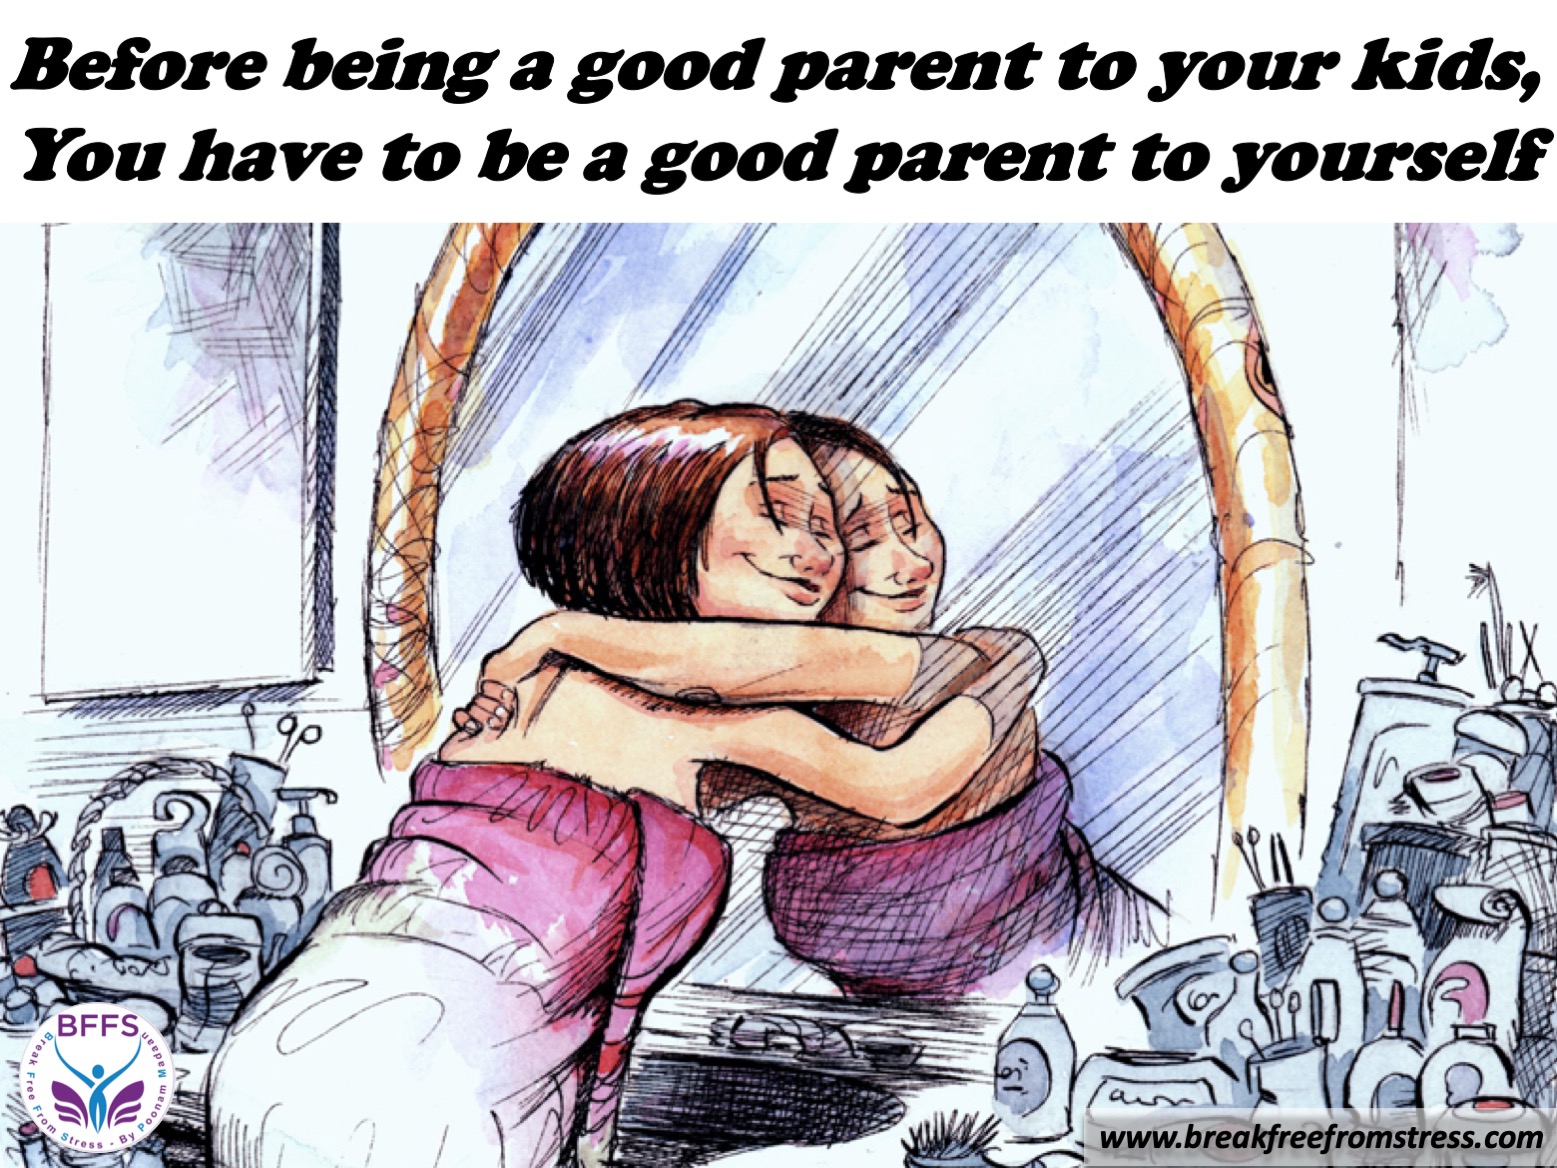 Parenting yourself!